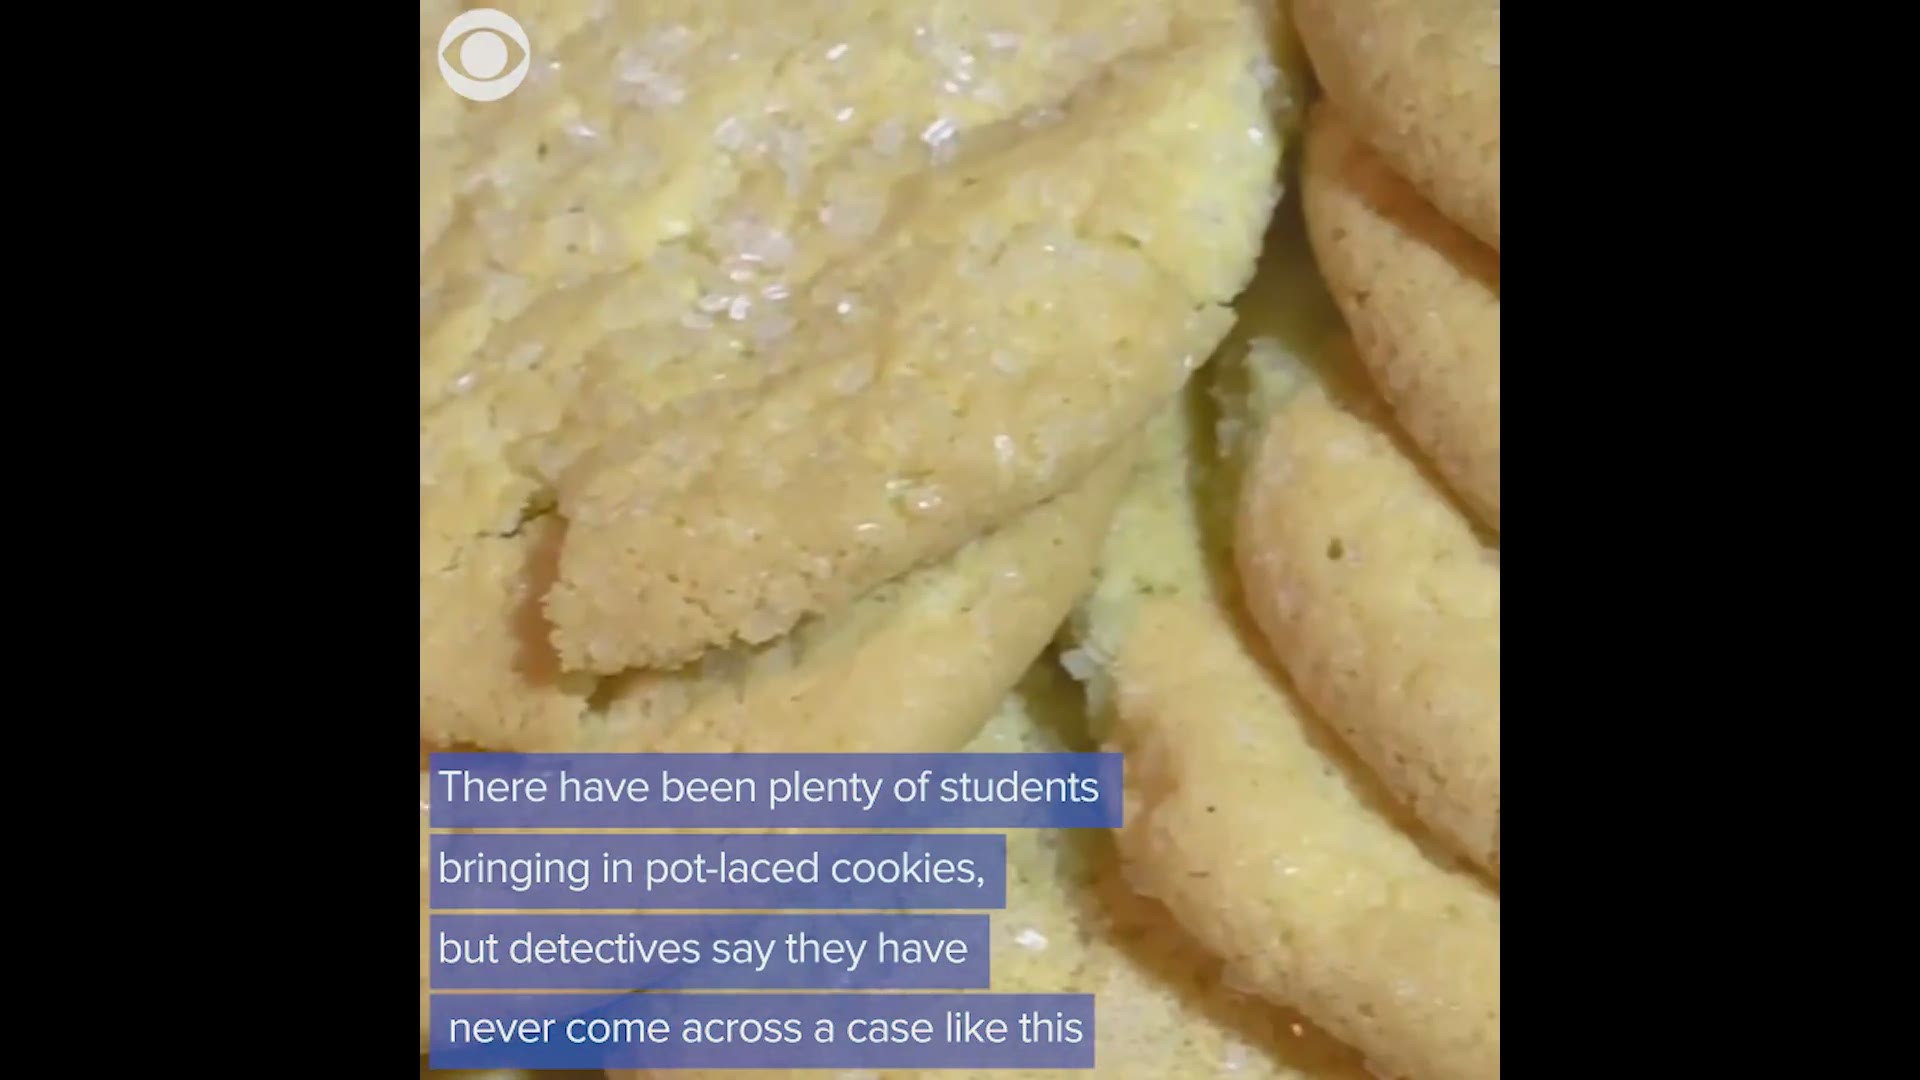 Police in Davis are looking into claims that students used the cremated remains of one of their grandparents in a cookie recipe, and then served the cookies to other unsuspecting students. Authorities say no actual evidence has been found to support the c